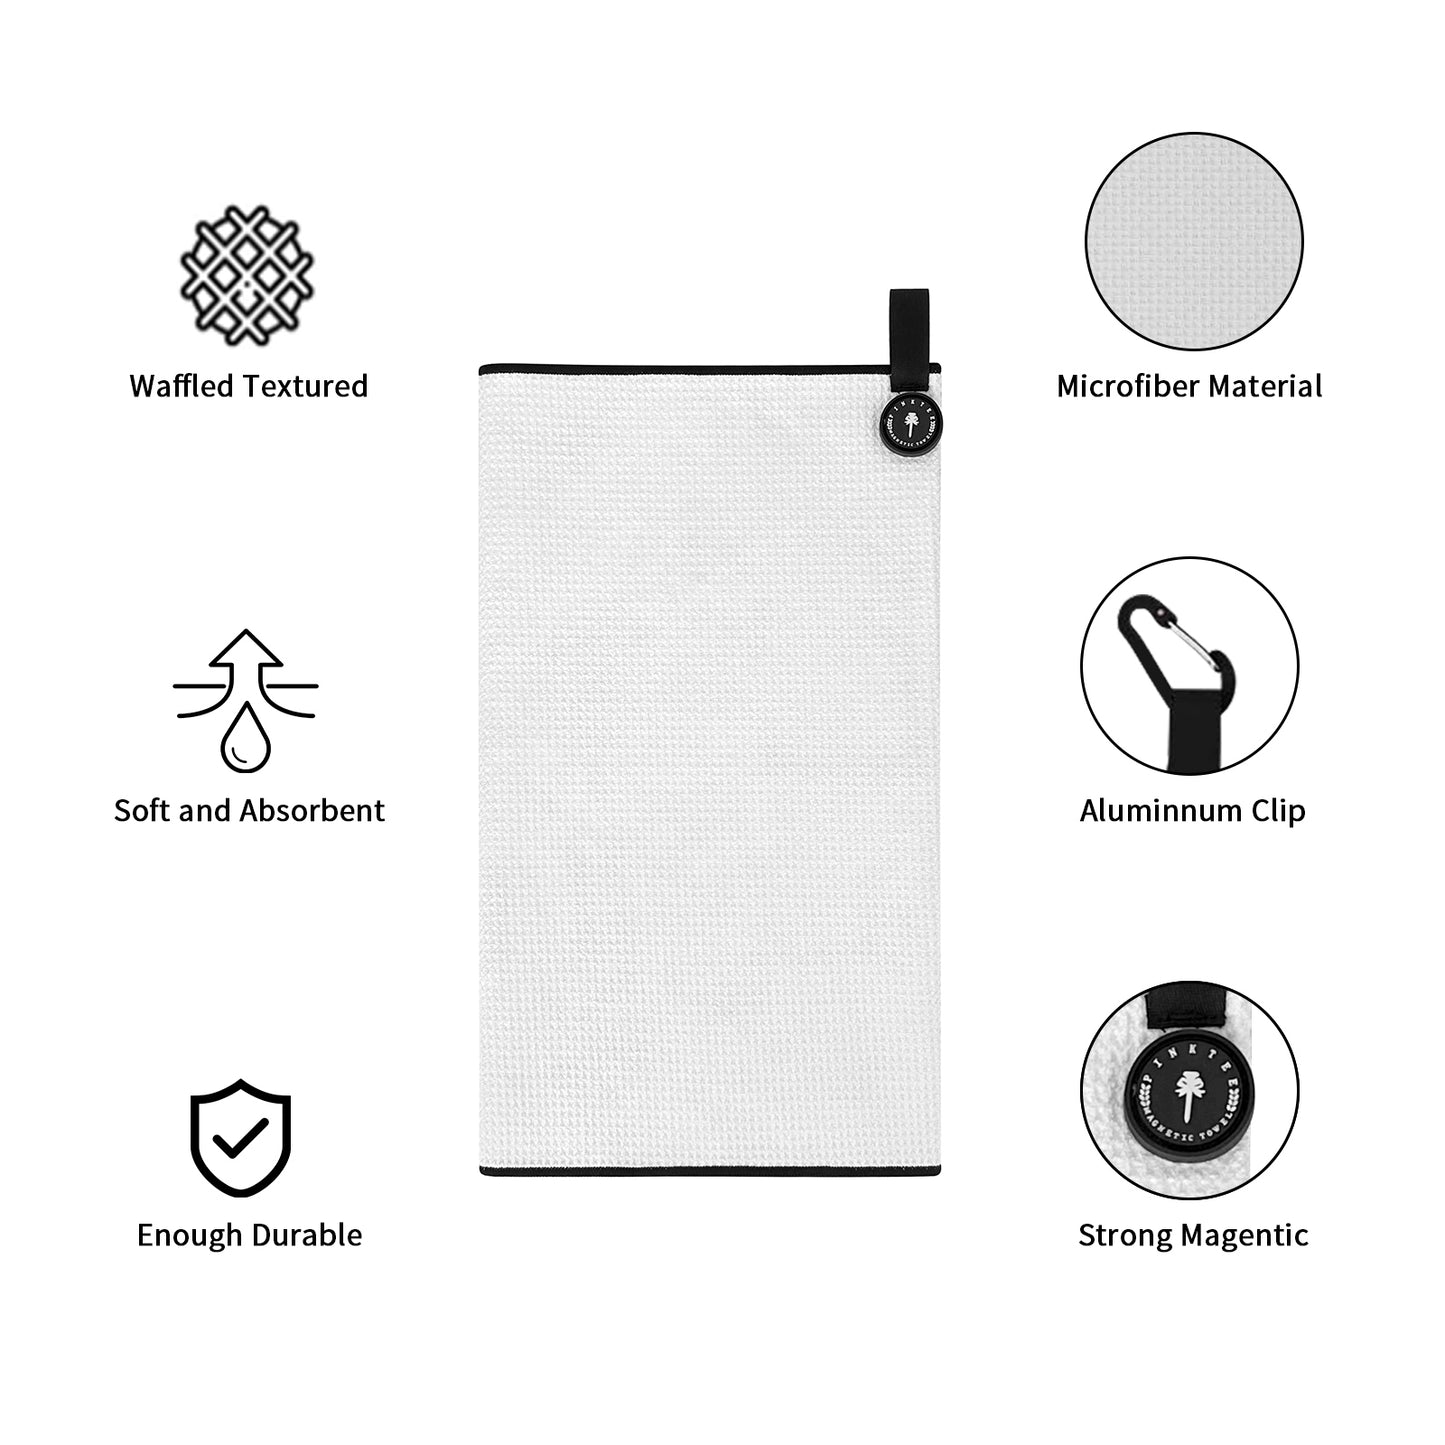 Magnetic Golf Towel, White 40x18'' Microfiber Golf Towel Golf Gifts for Men Women Strong Hold to Golf Carts or Clubs